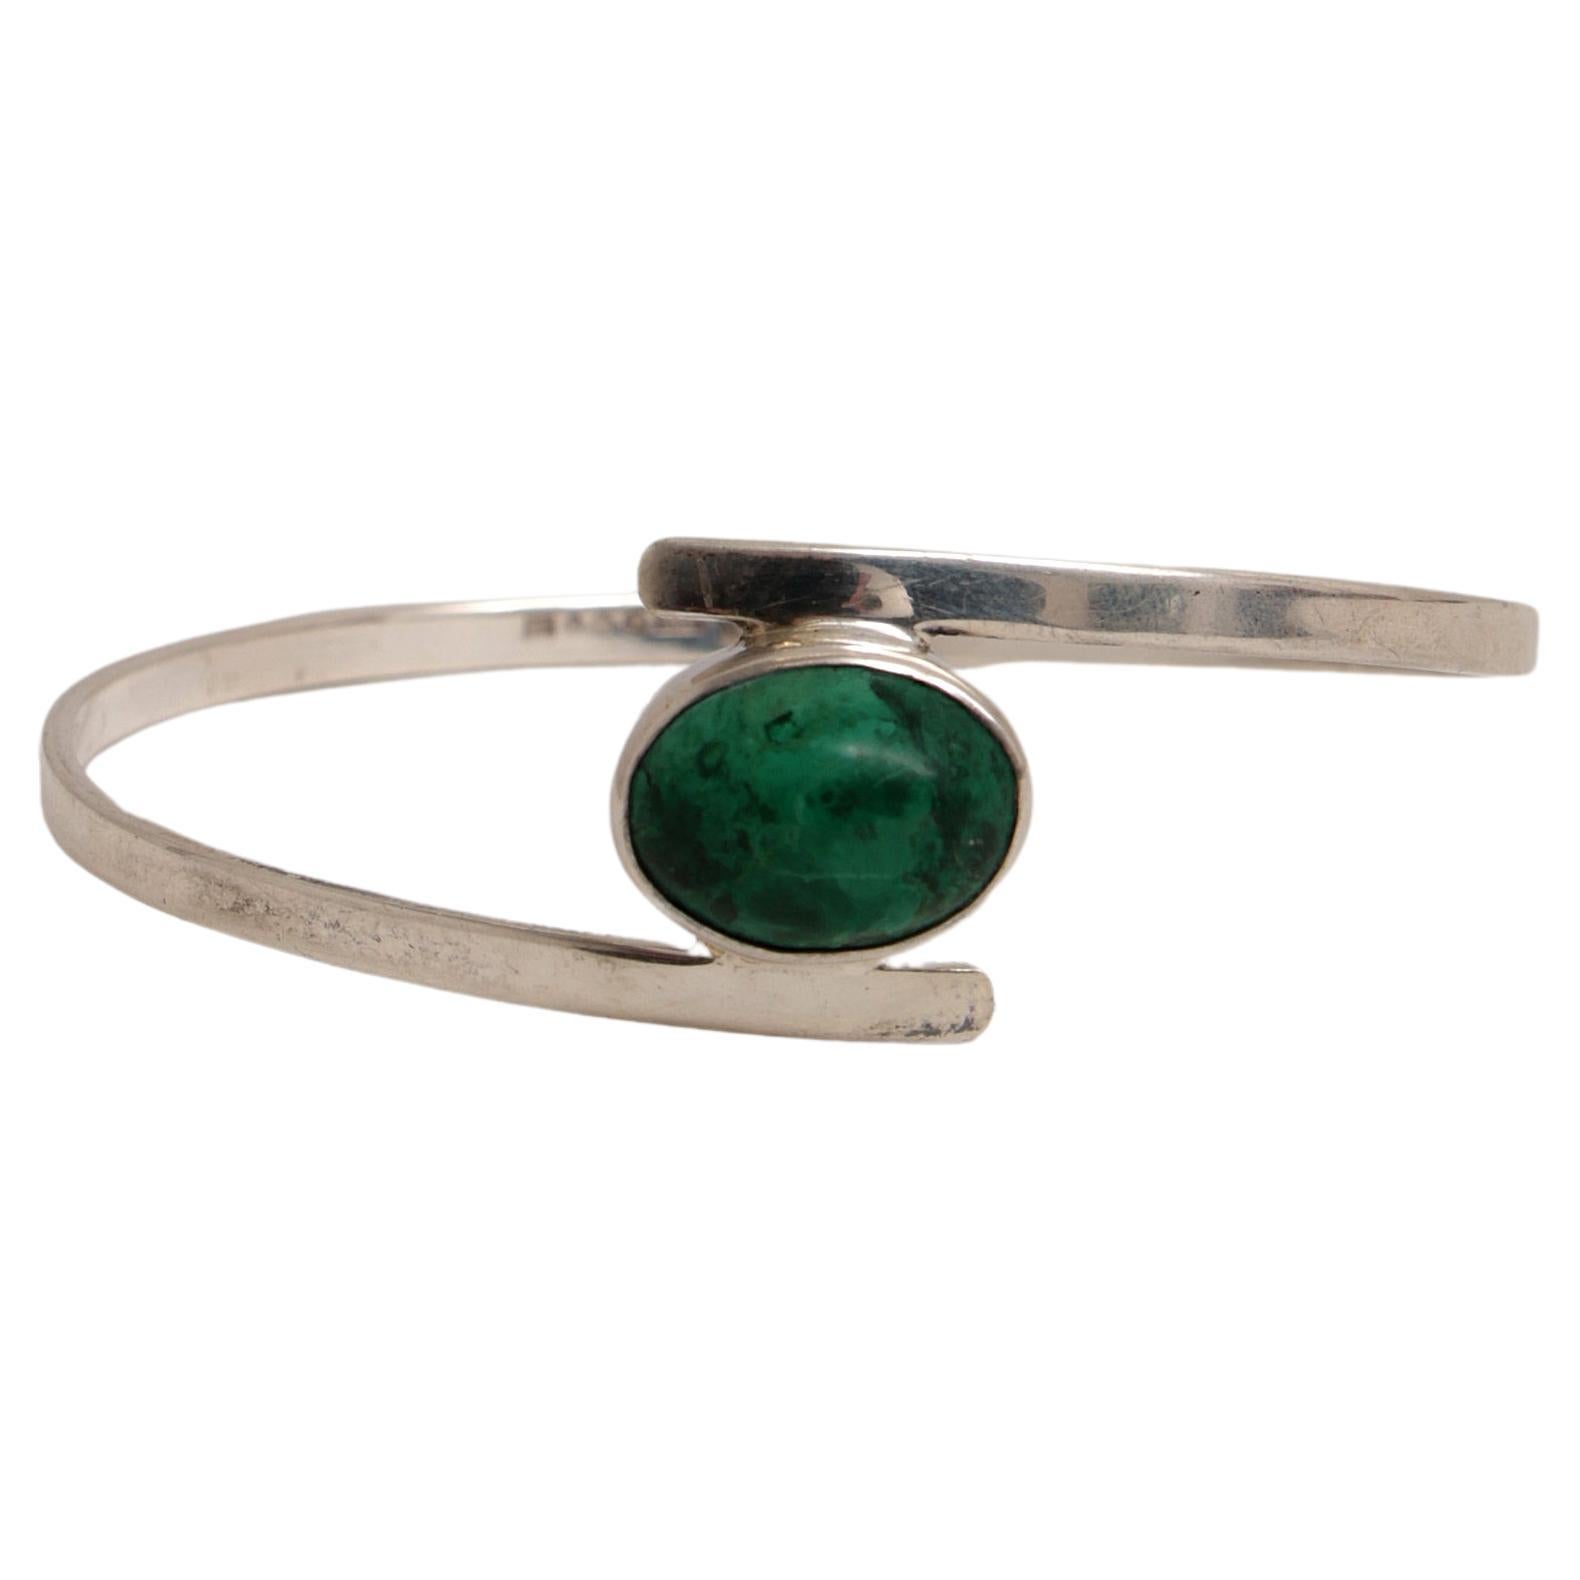 Scandinavian Modern Sterling Silver bracelet by Isaac Cohen with green stone.